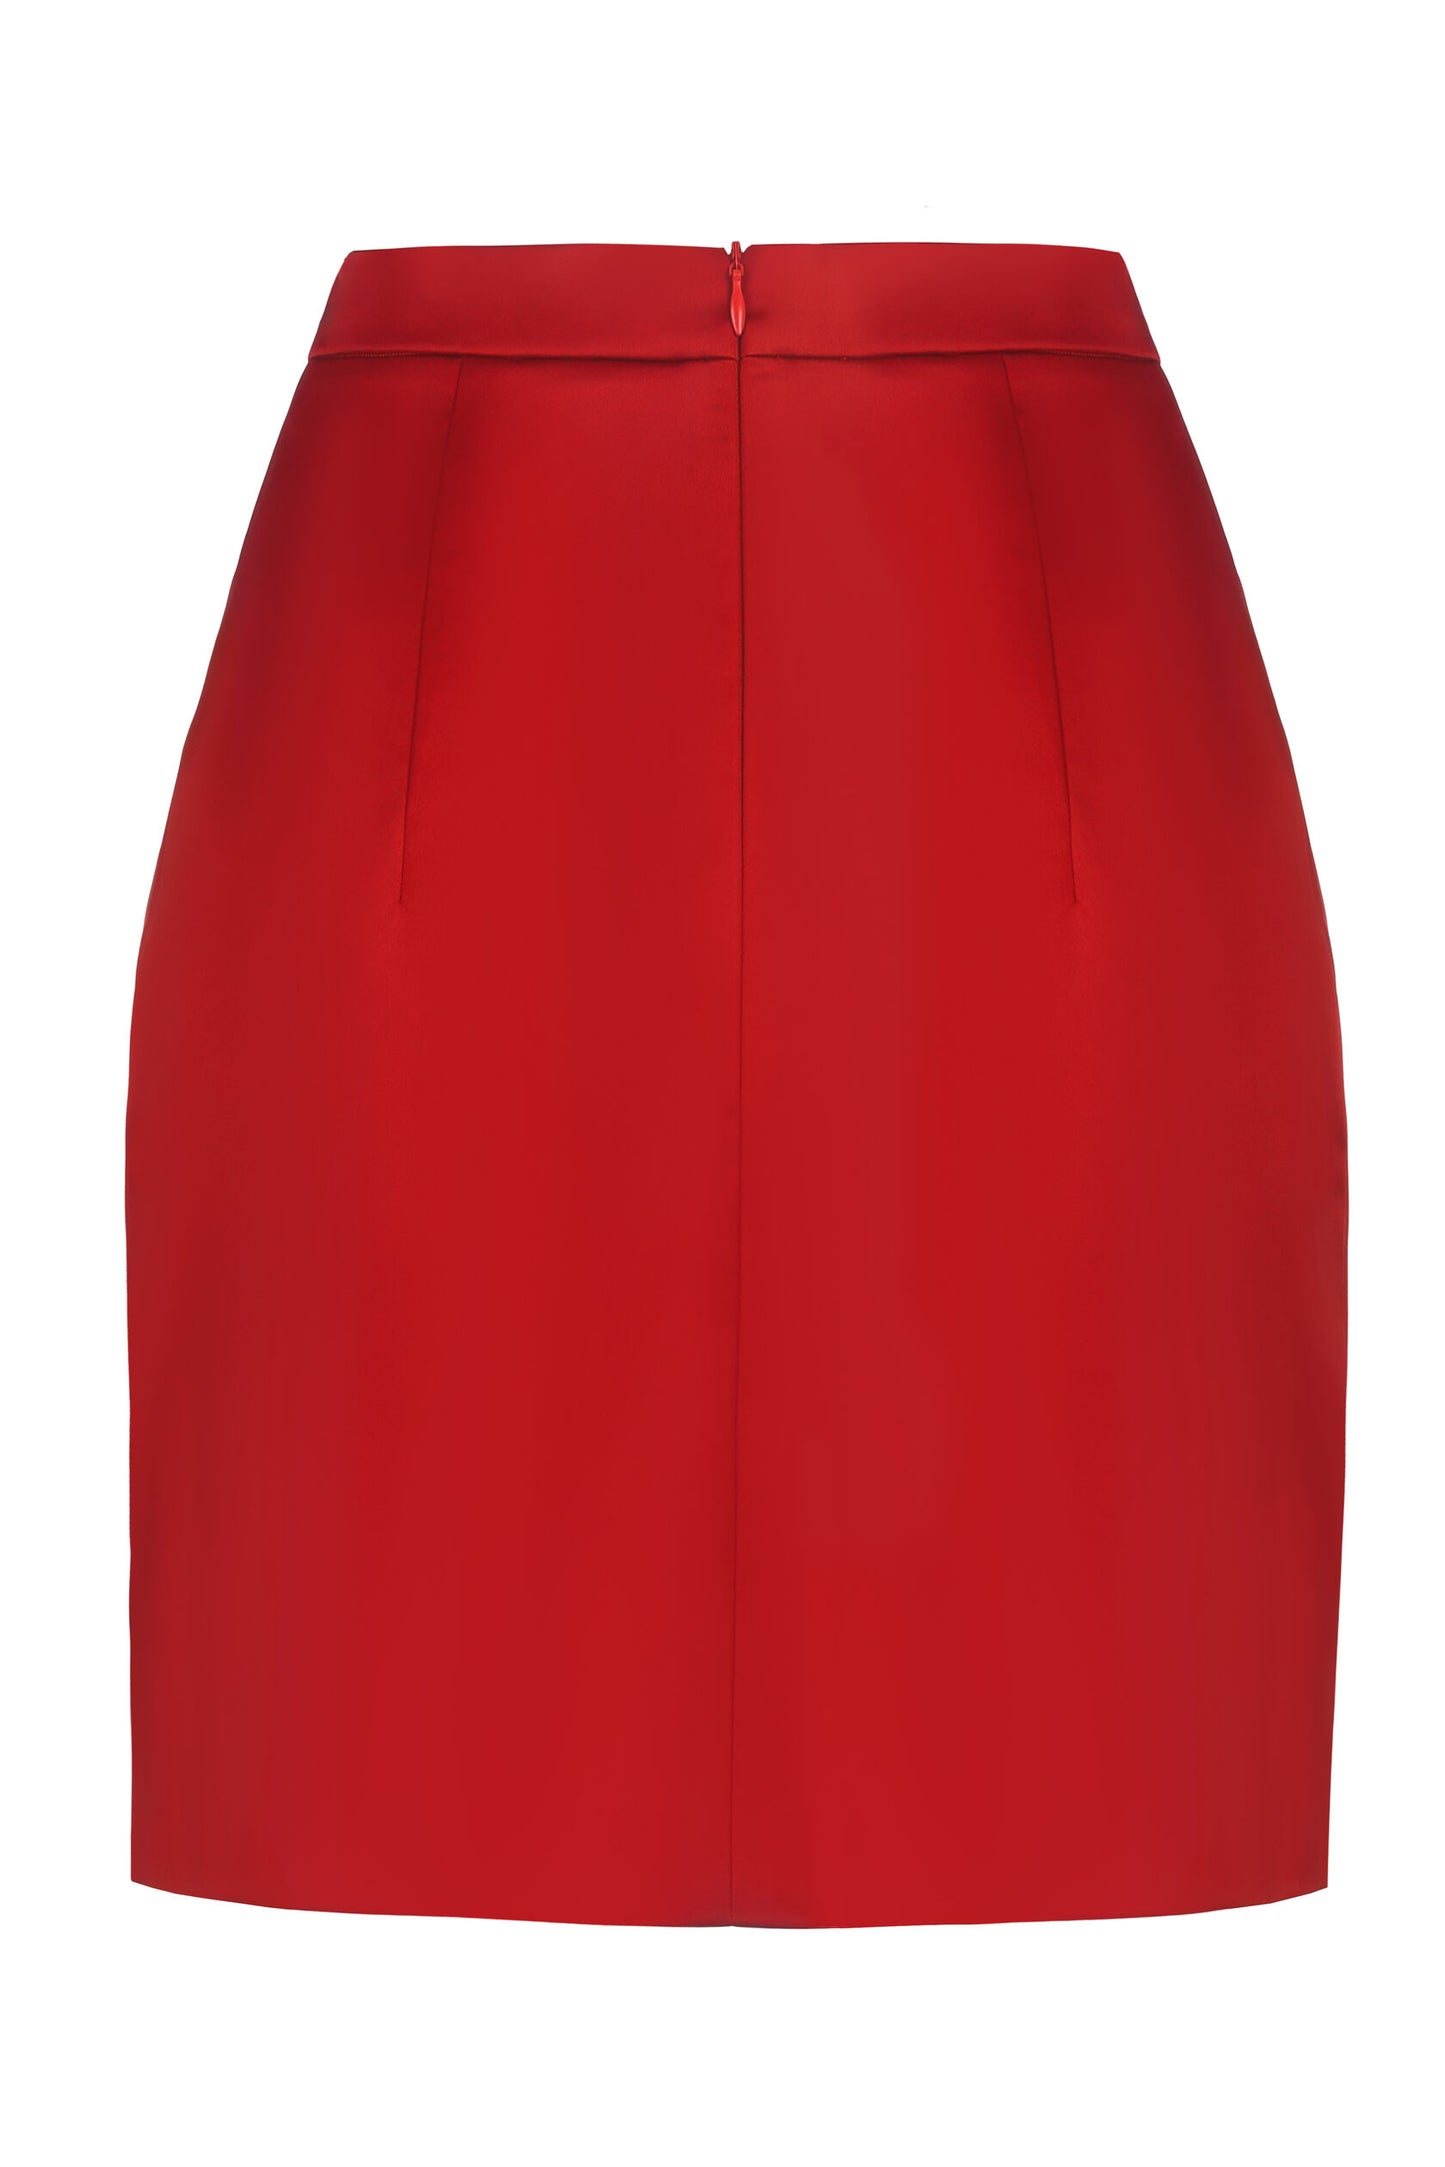 Mini skirt with slit red